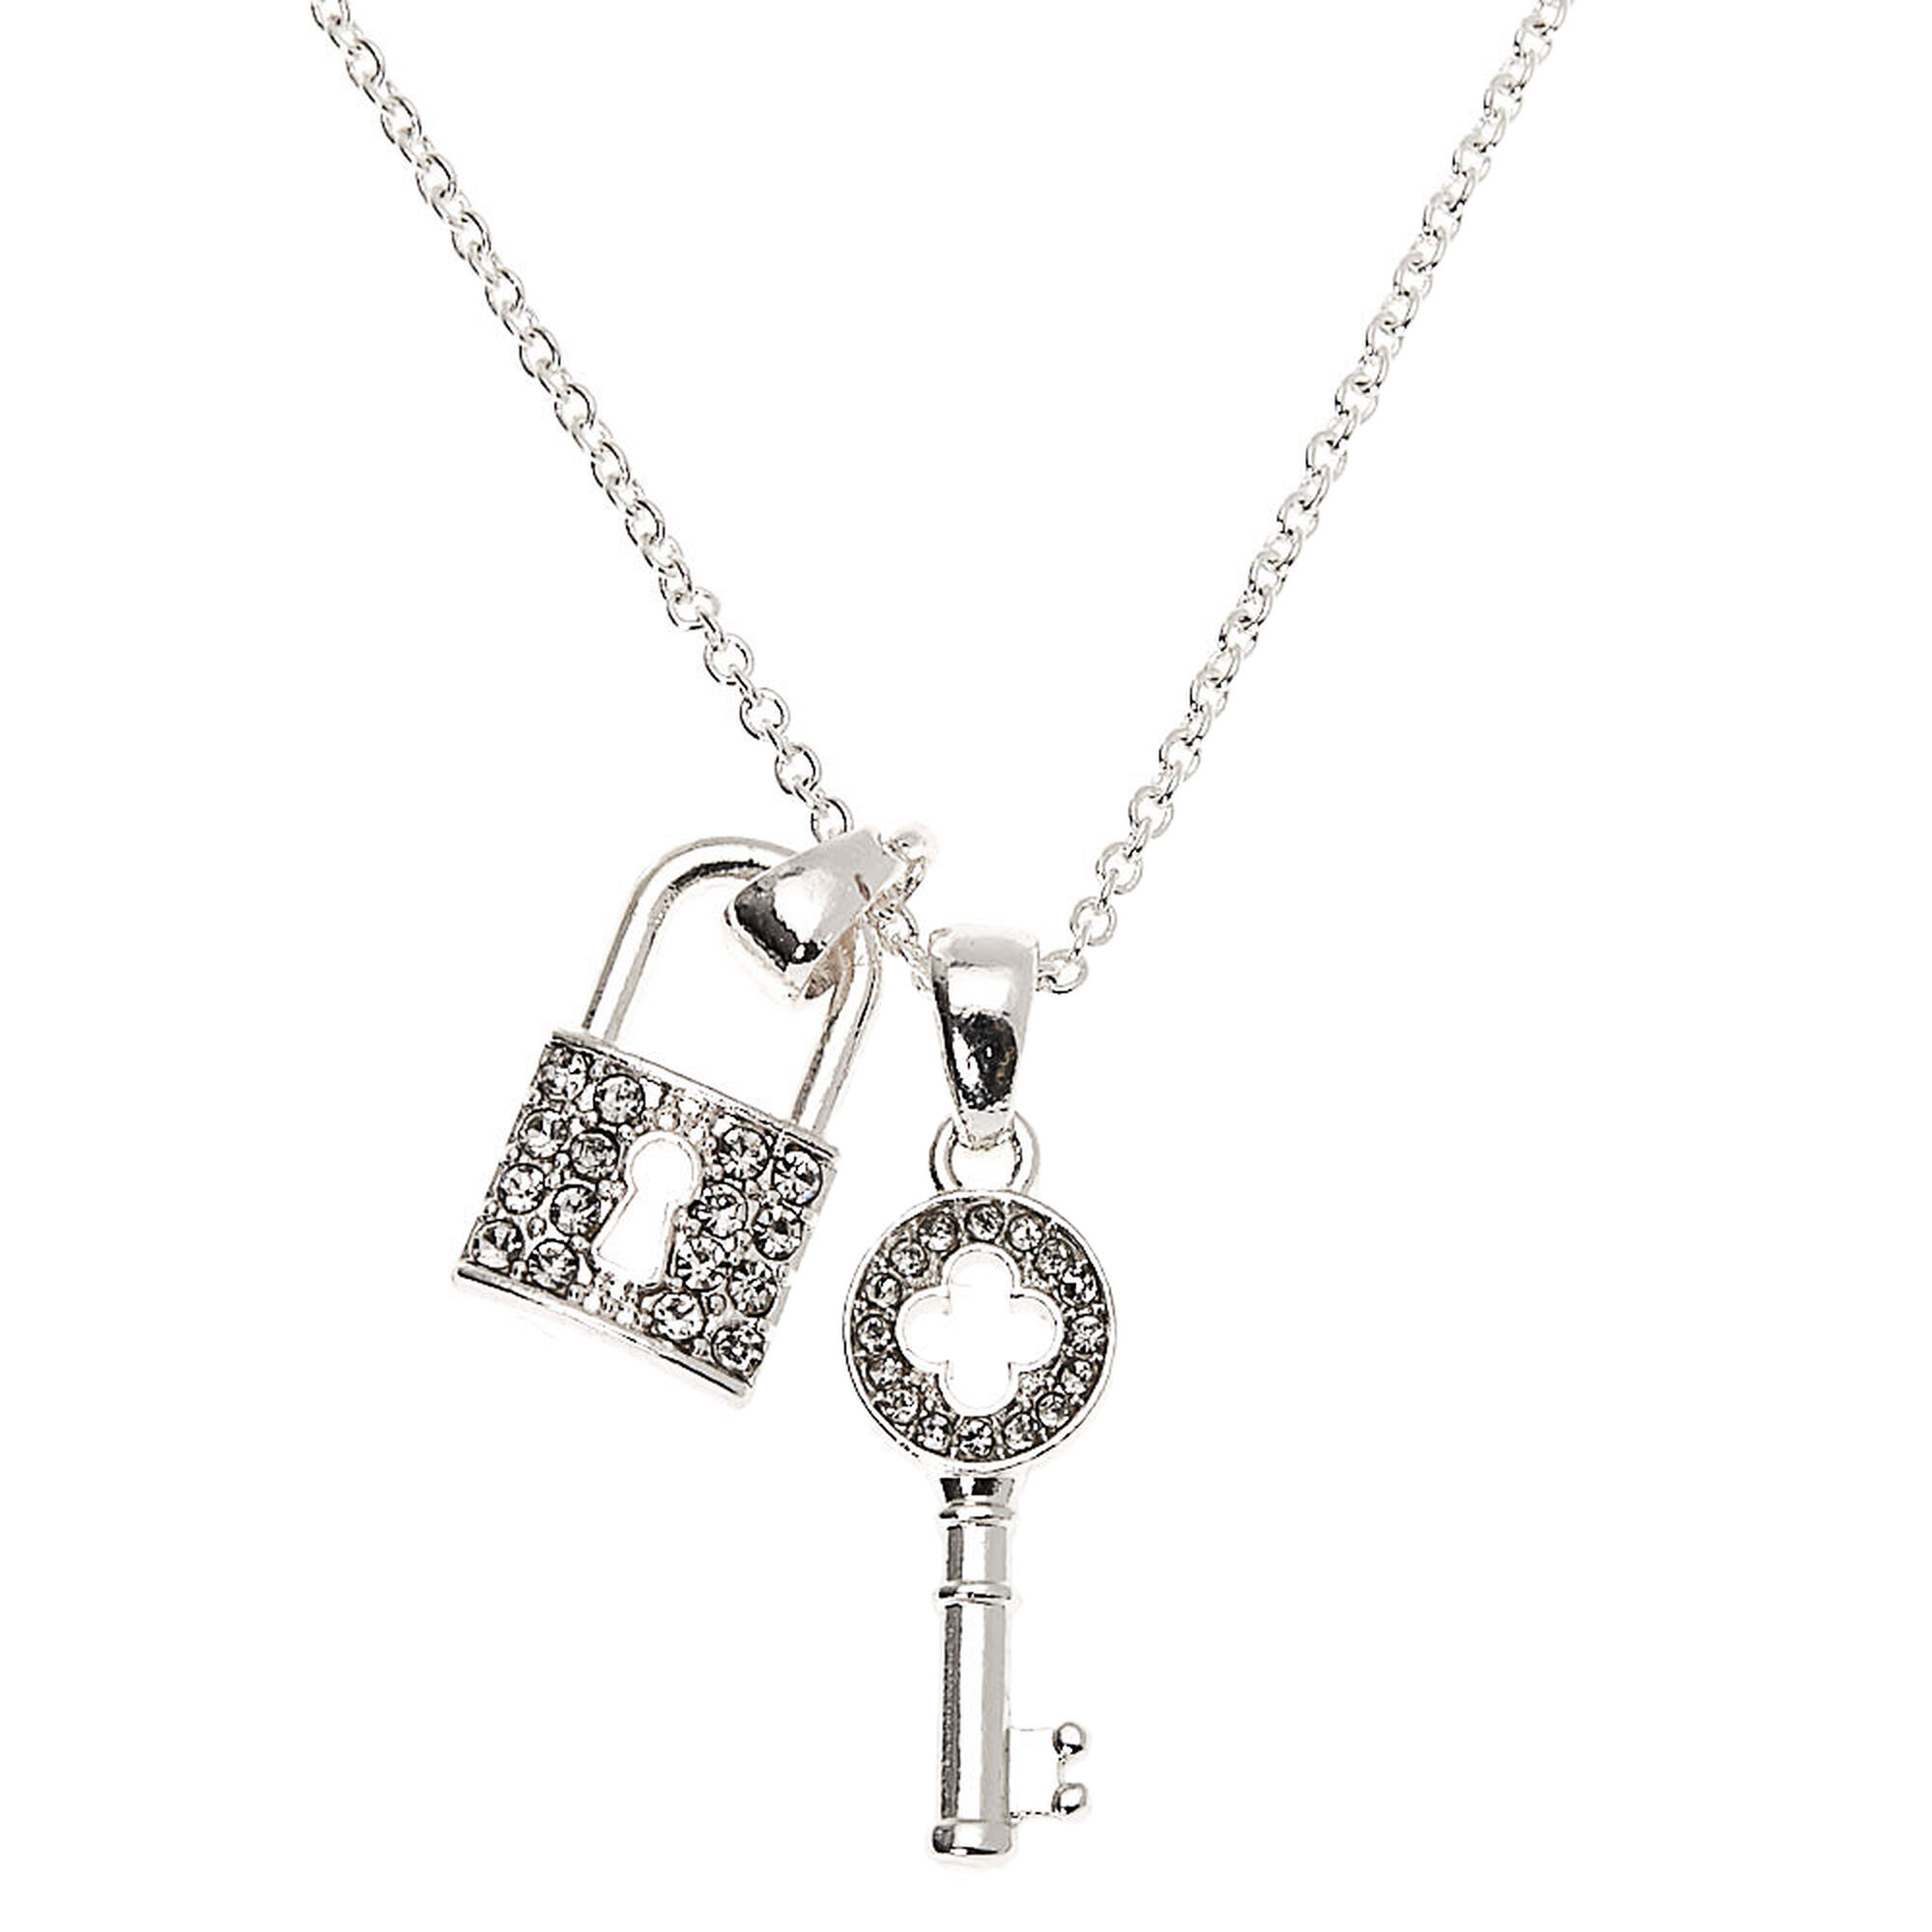 Round Silver Lock and Keys for Locking Collar Jewelry